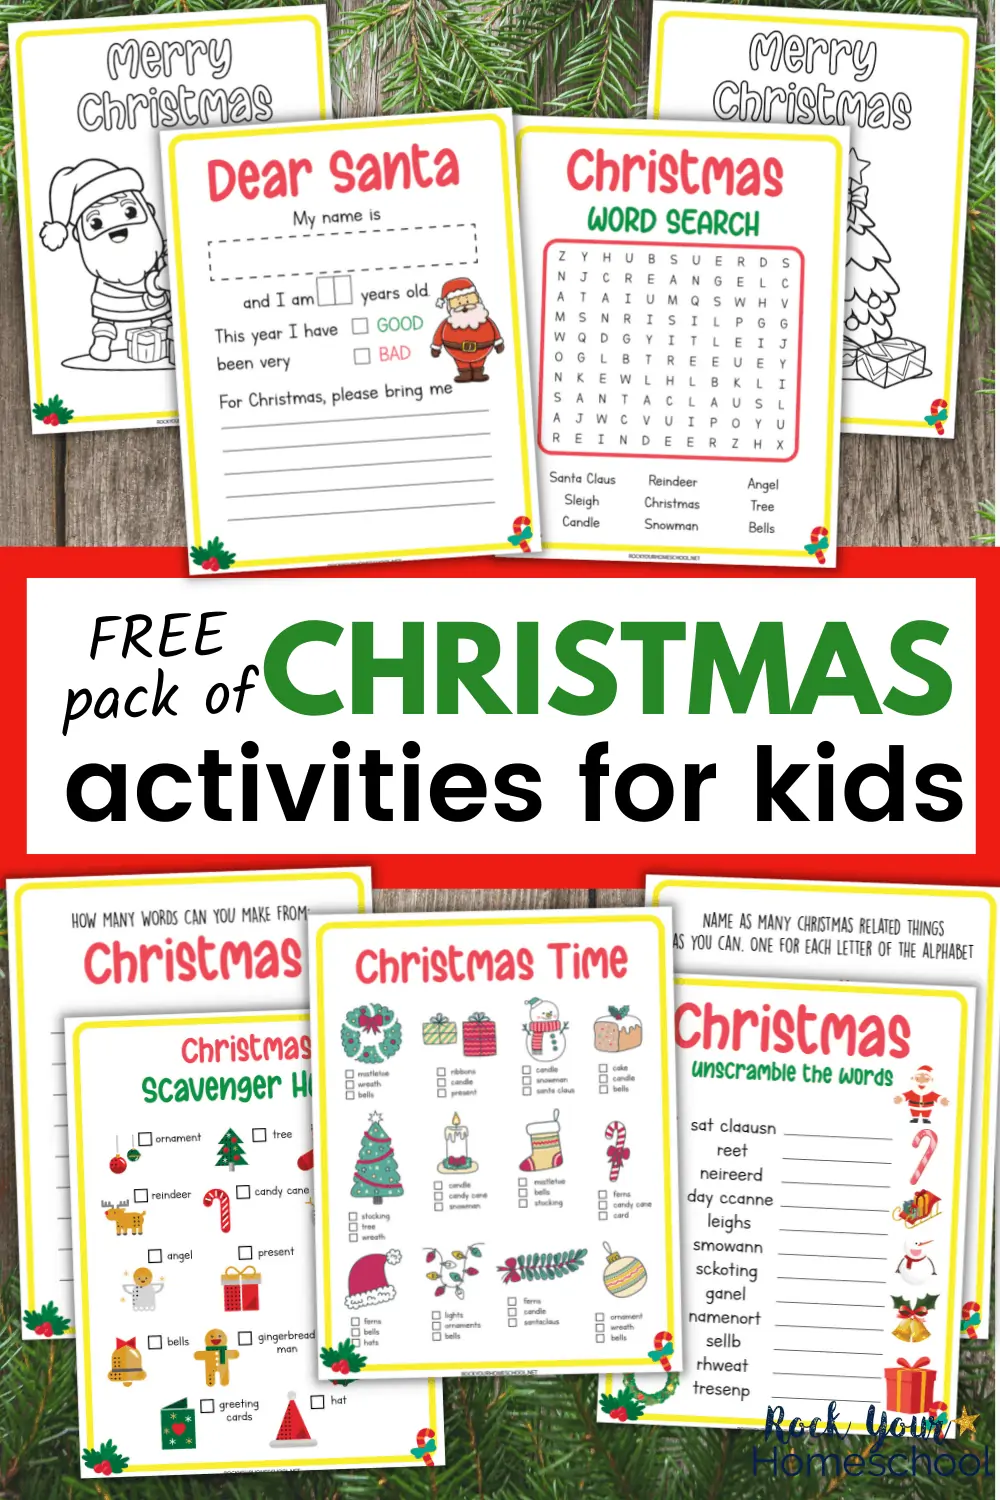 Free Christmas Activities Pack for Kids to Have Special Holiday Fun